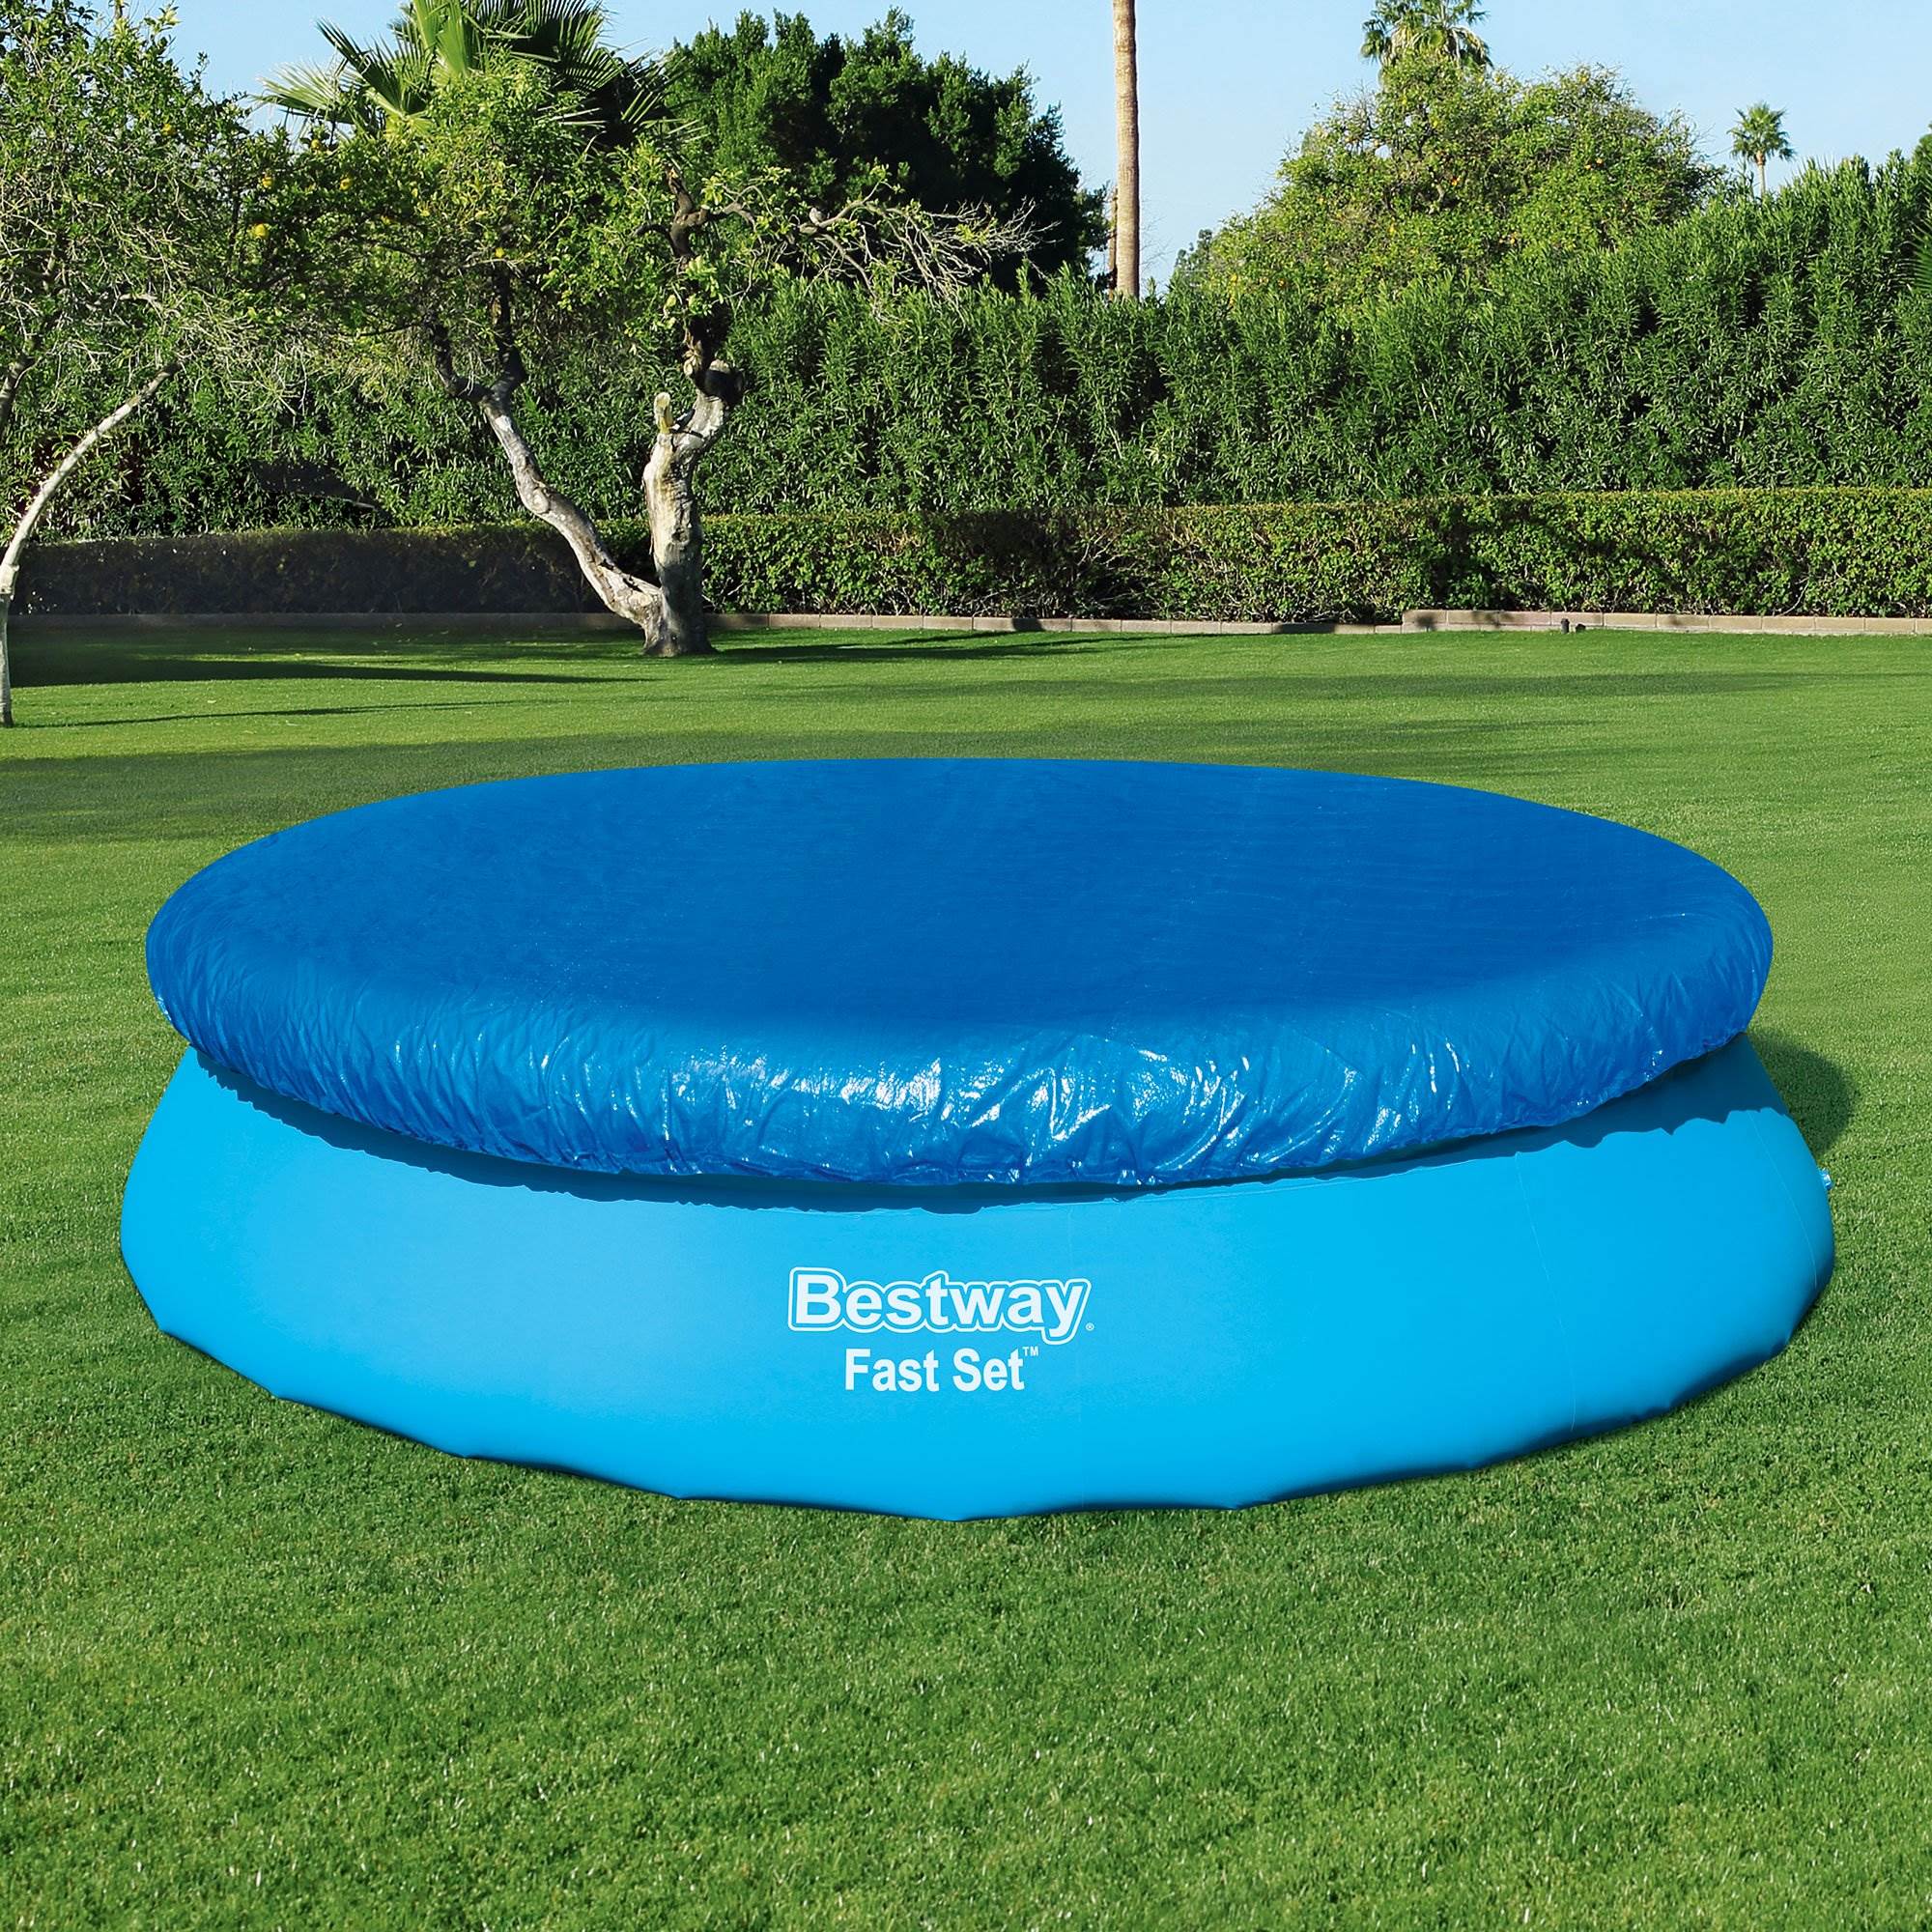 Bestway Flowclear Fast Set 12 Foot Round PVC Pool Cover with Ropes, Blue (Used) 6942138918267 eBay